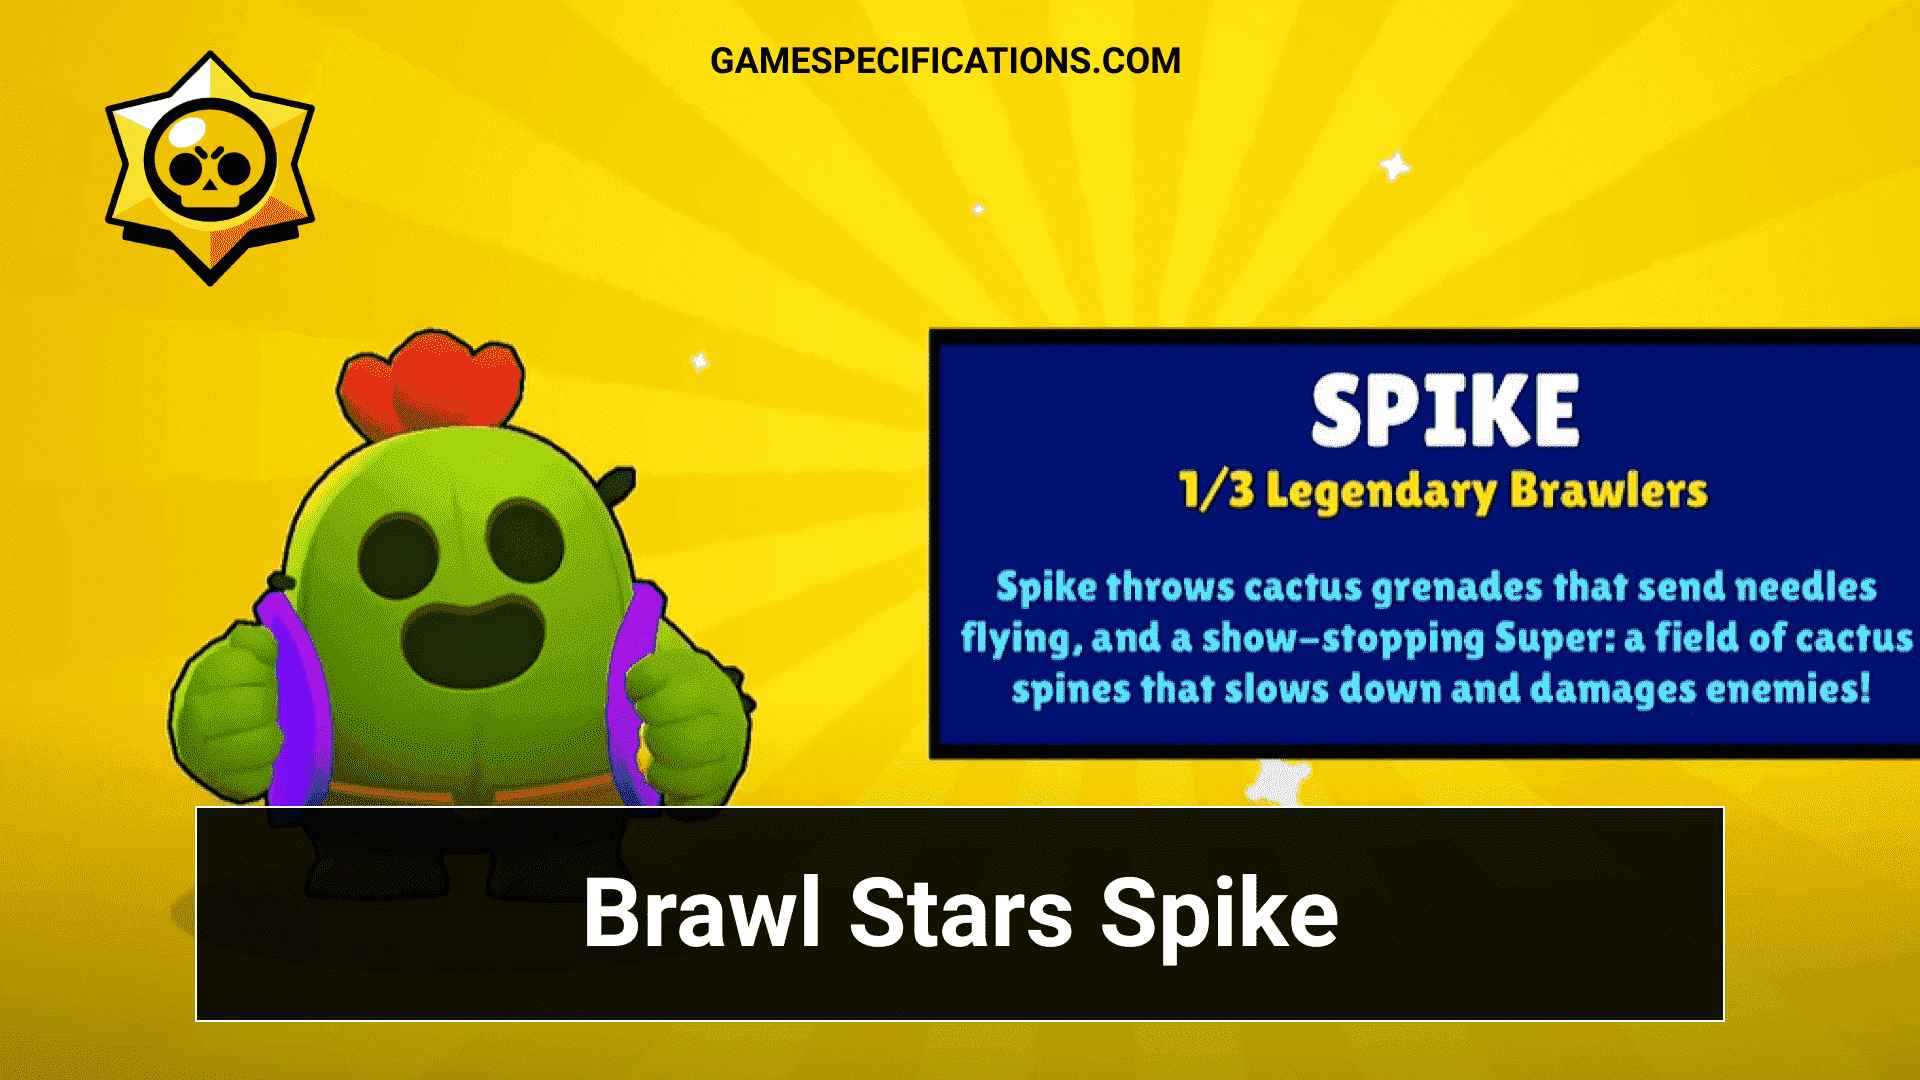 Brawl Stars Spike Introducing The Legendary Character In The Game Game Specifications - nouvel avatar piper brawl star